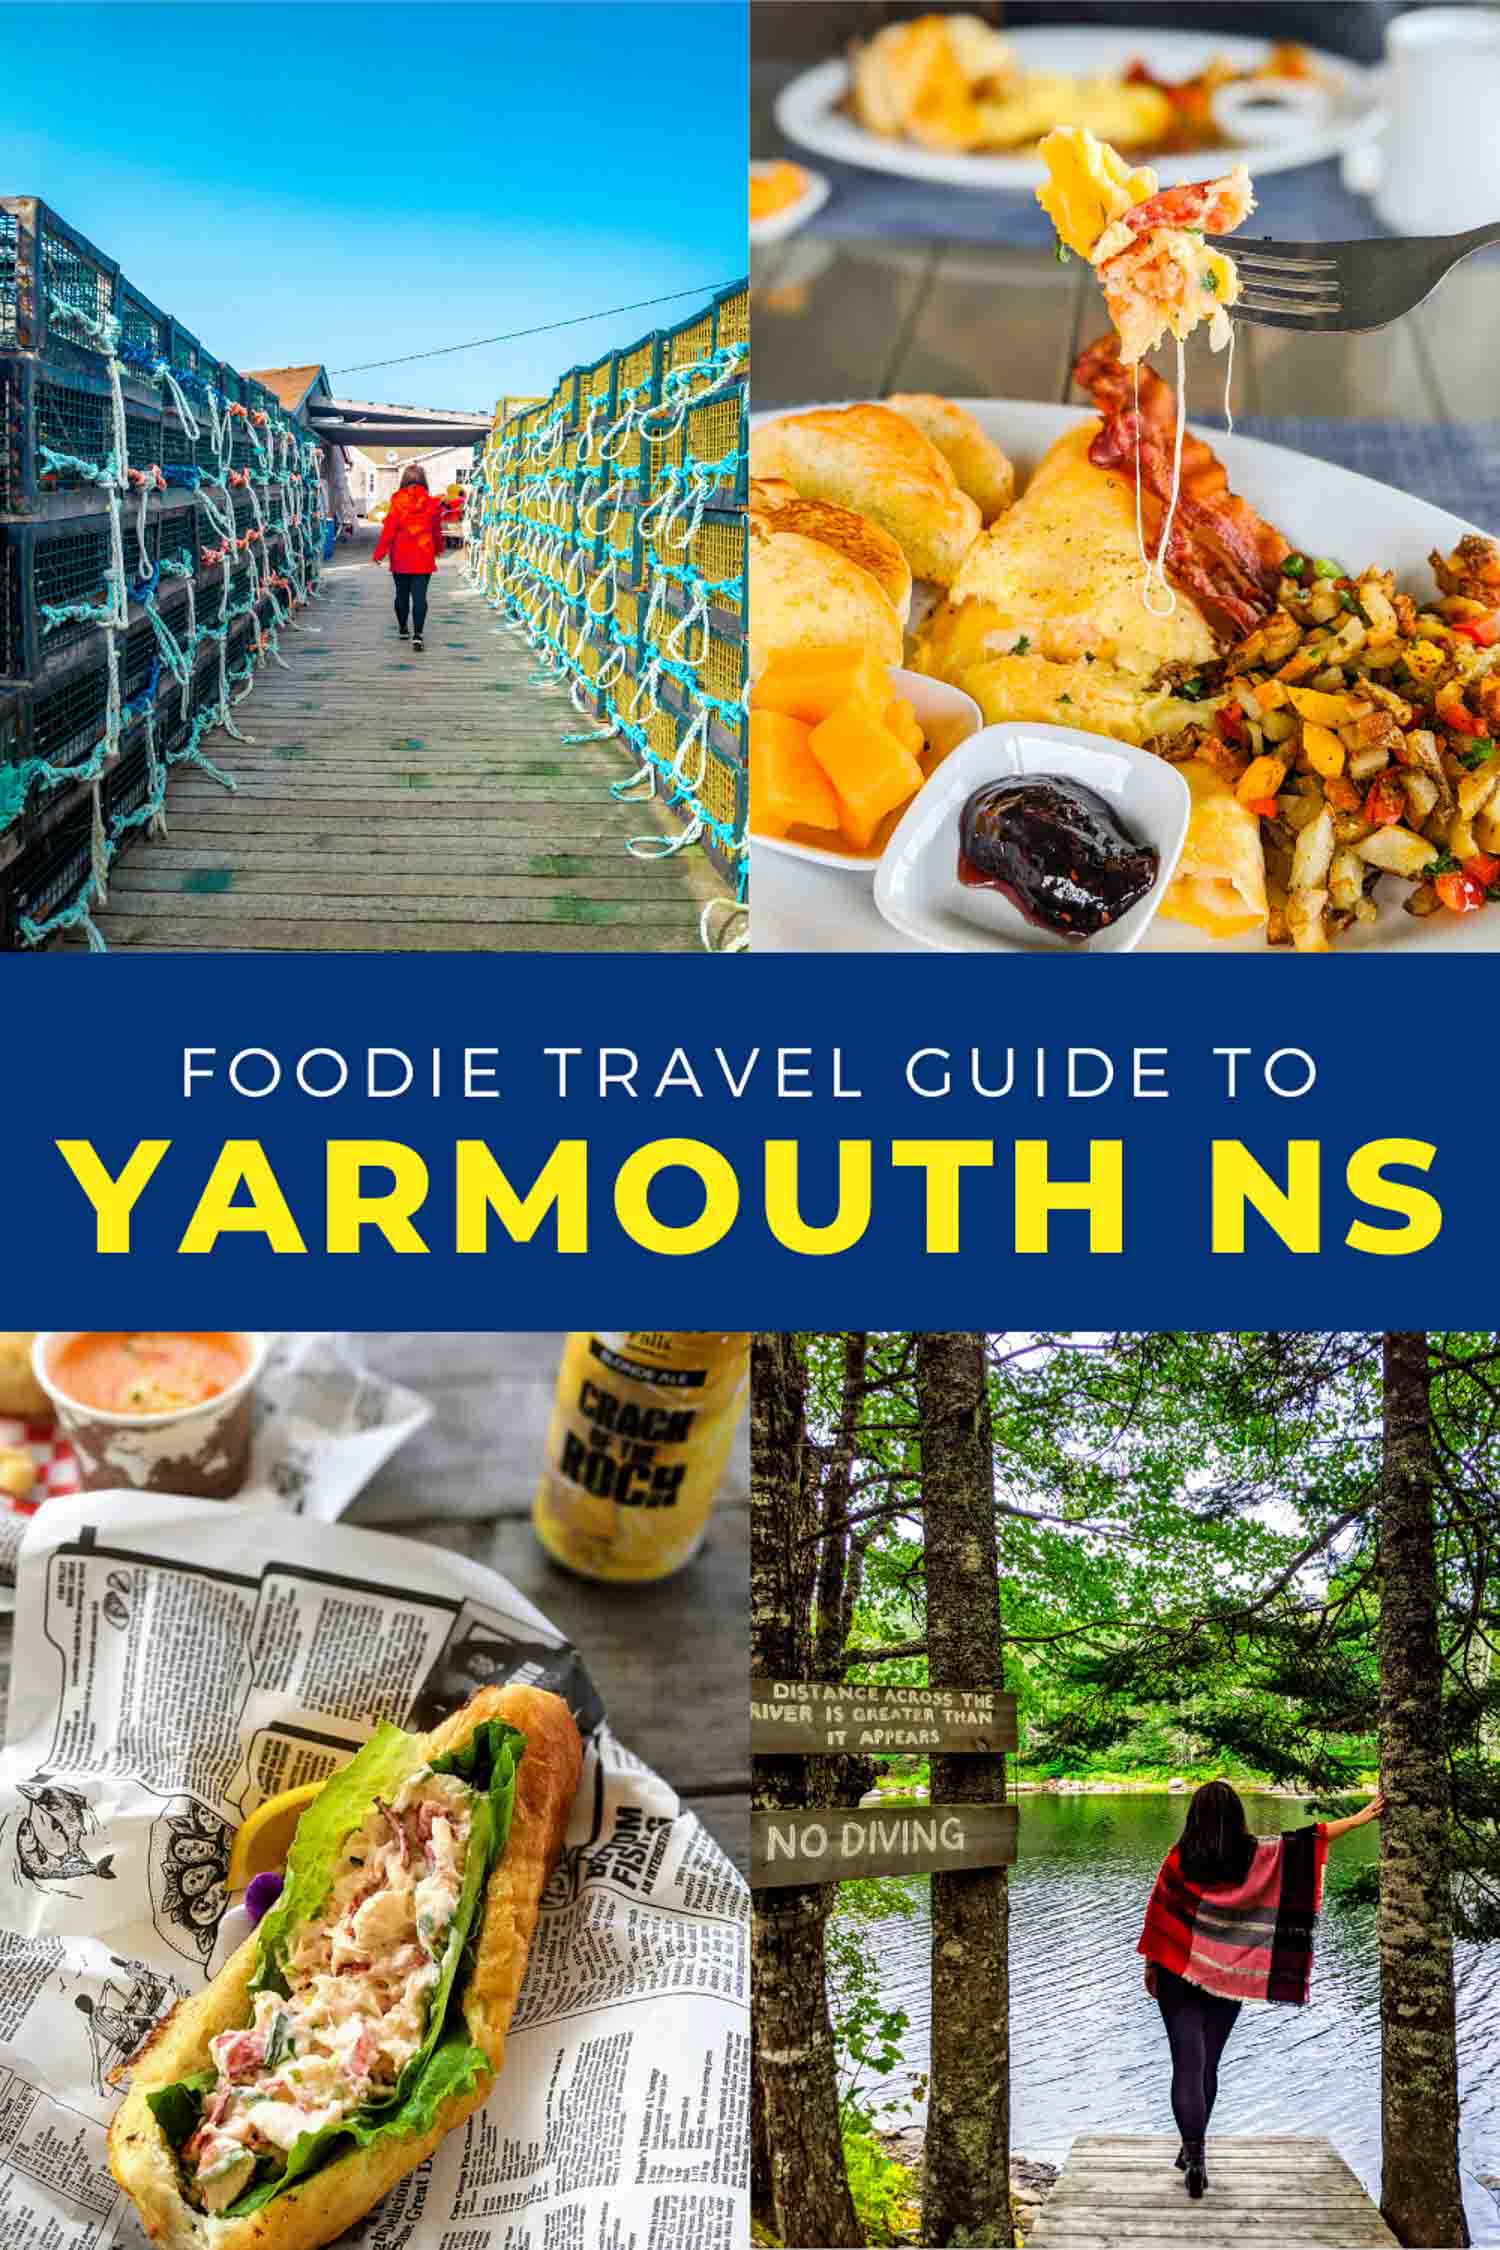 19 Delicious Yarmouth NS Restaurants Worth Traveling For